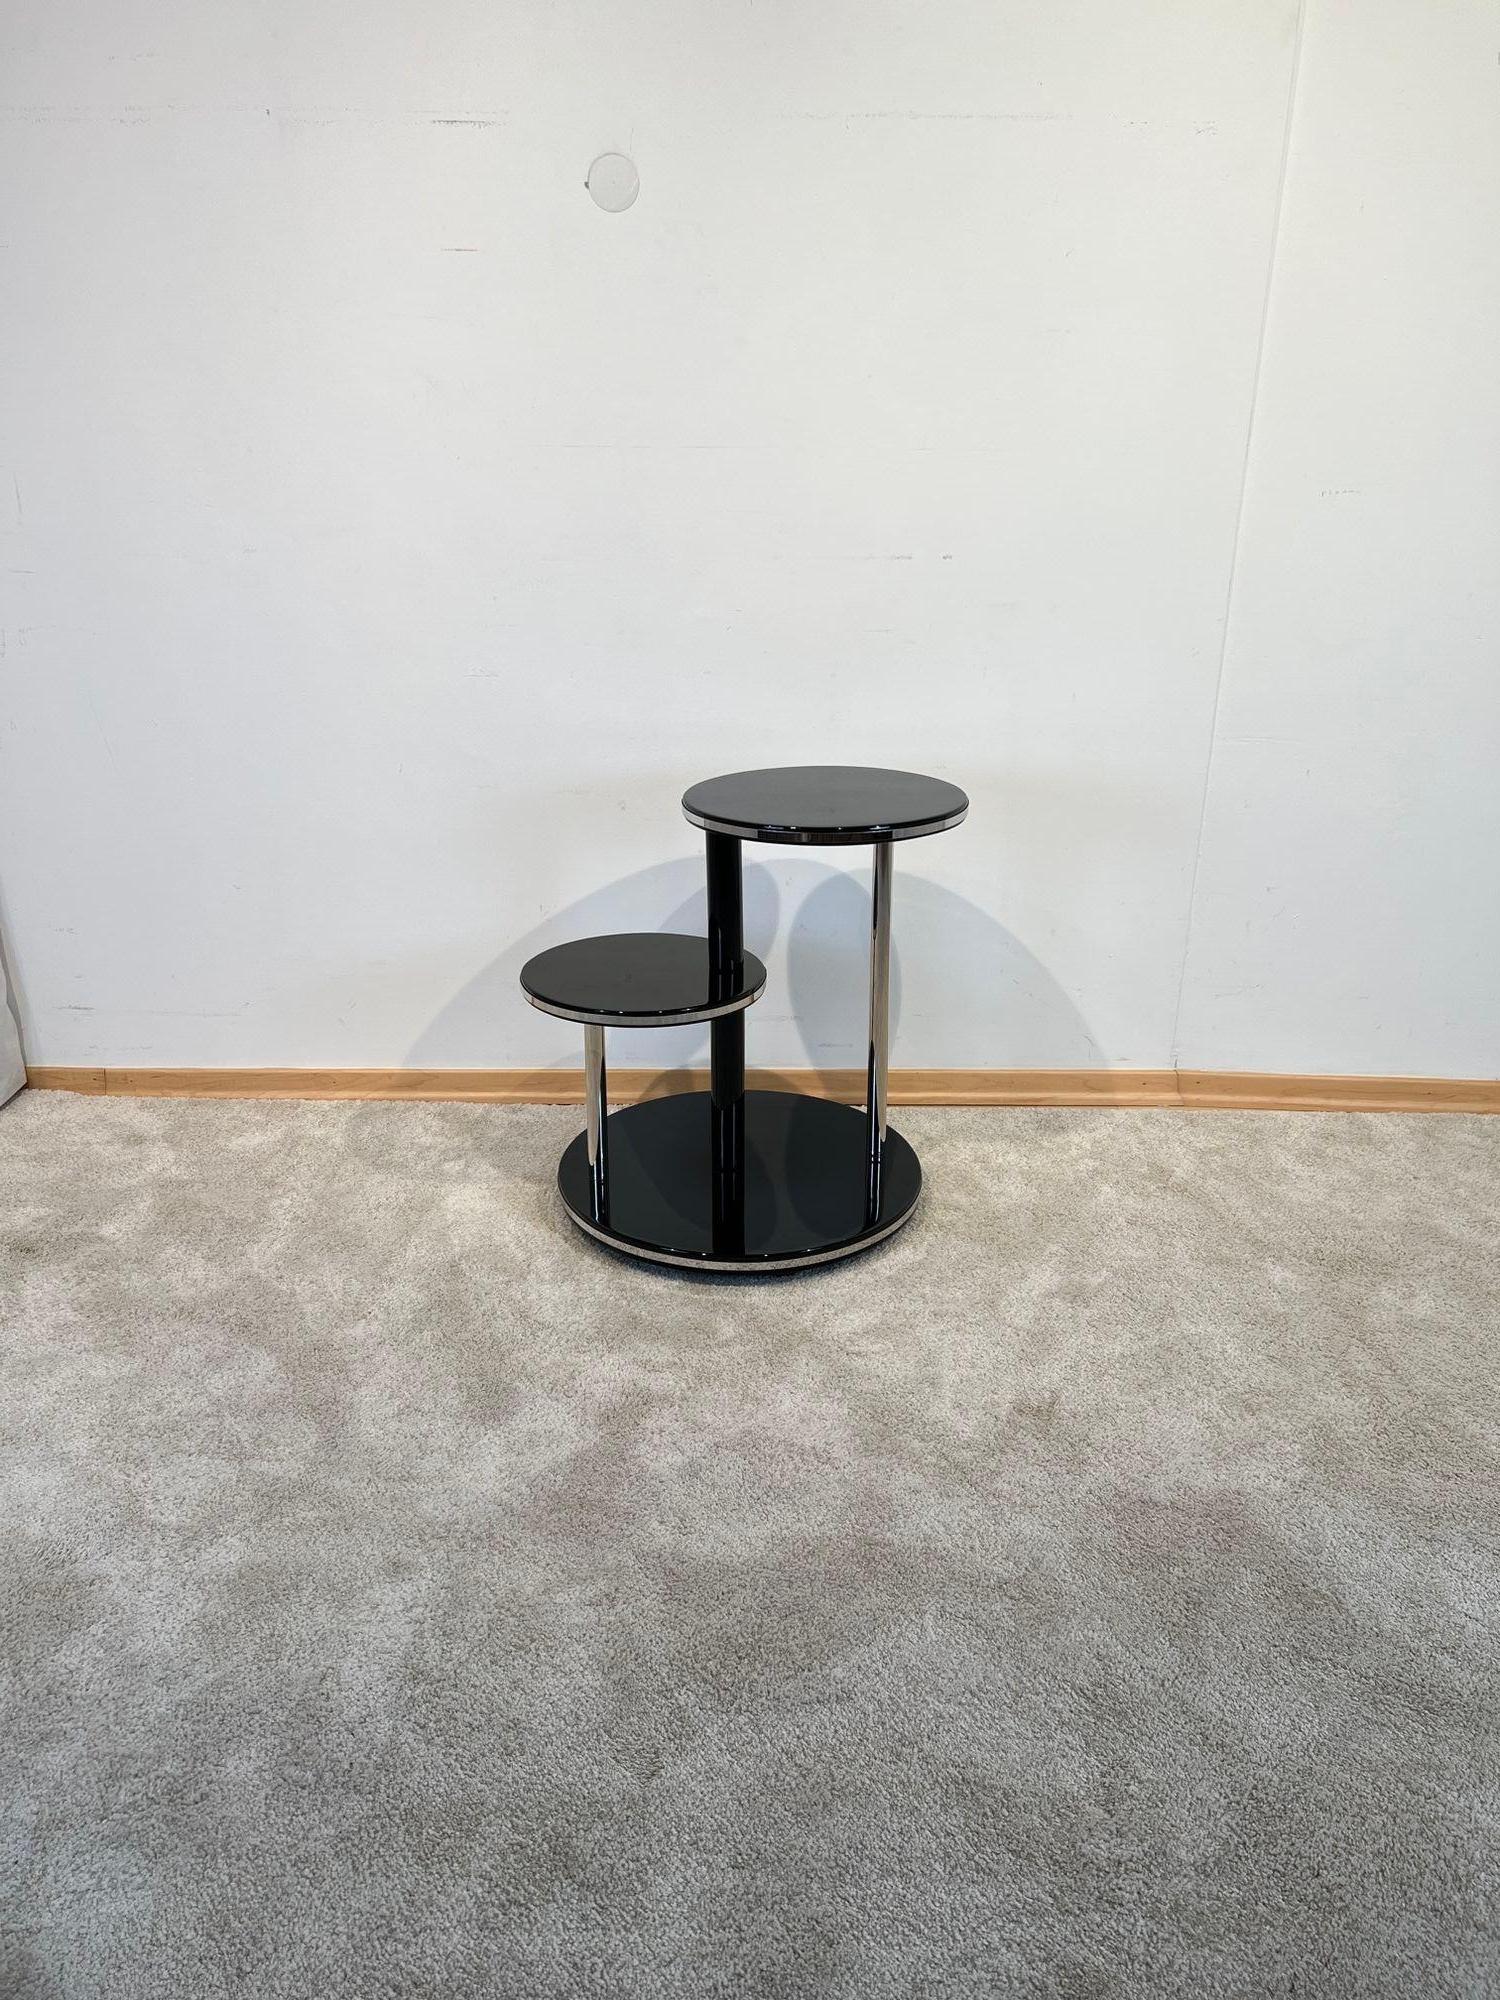 Stainless Steel Art Deco Round Side Table, Black Lacquer, Chrome, Metal Trims, France circa 1930 For Sale